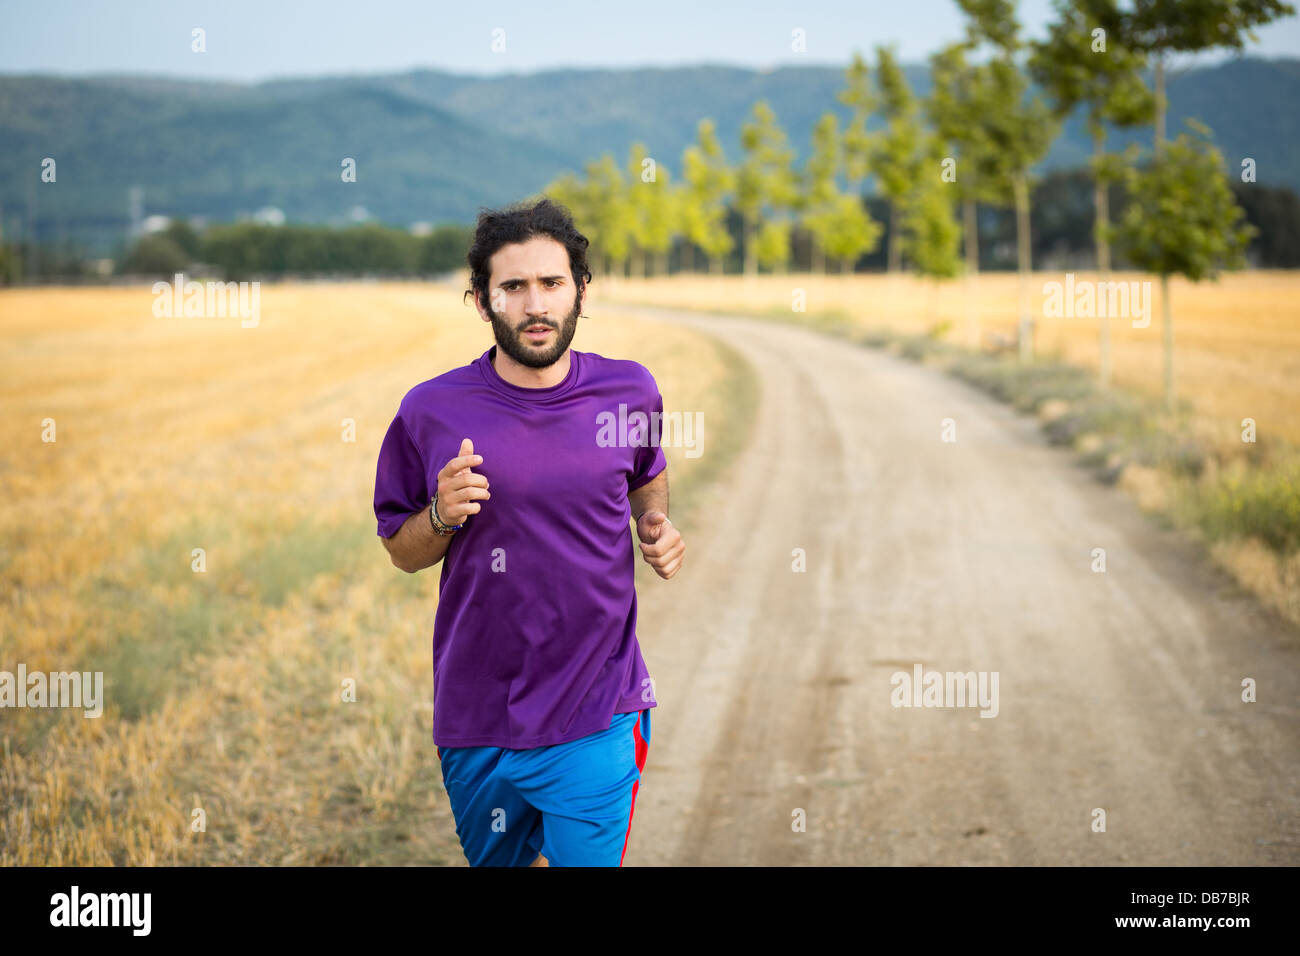 Young athletic man running in the nature Stock Photo